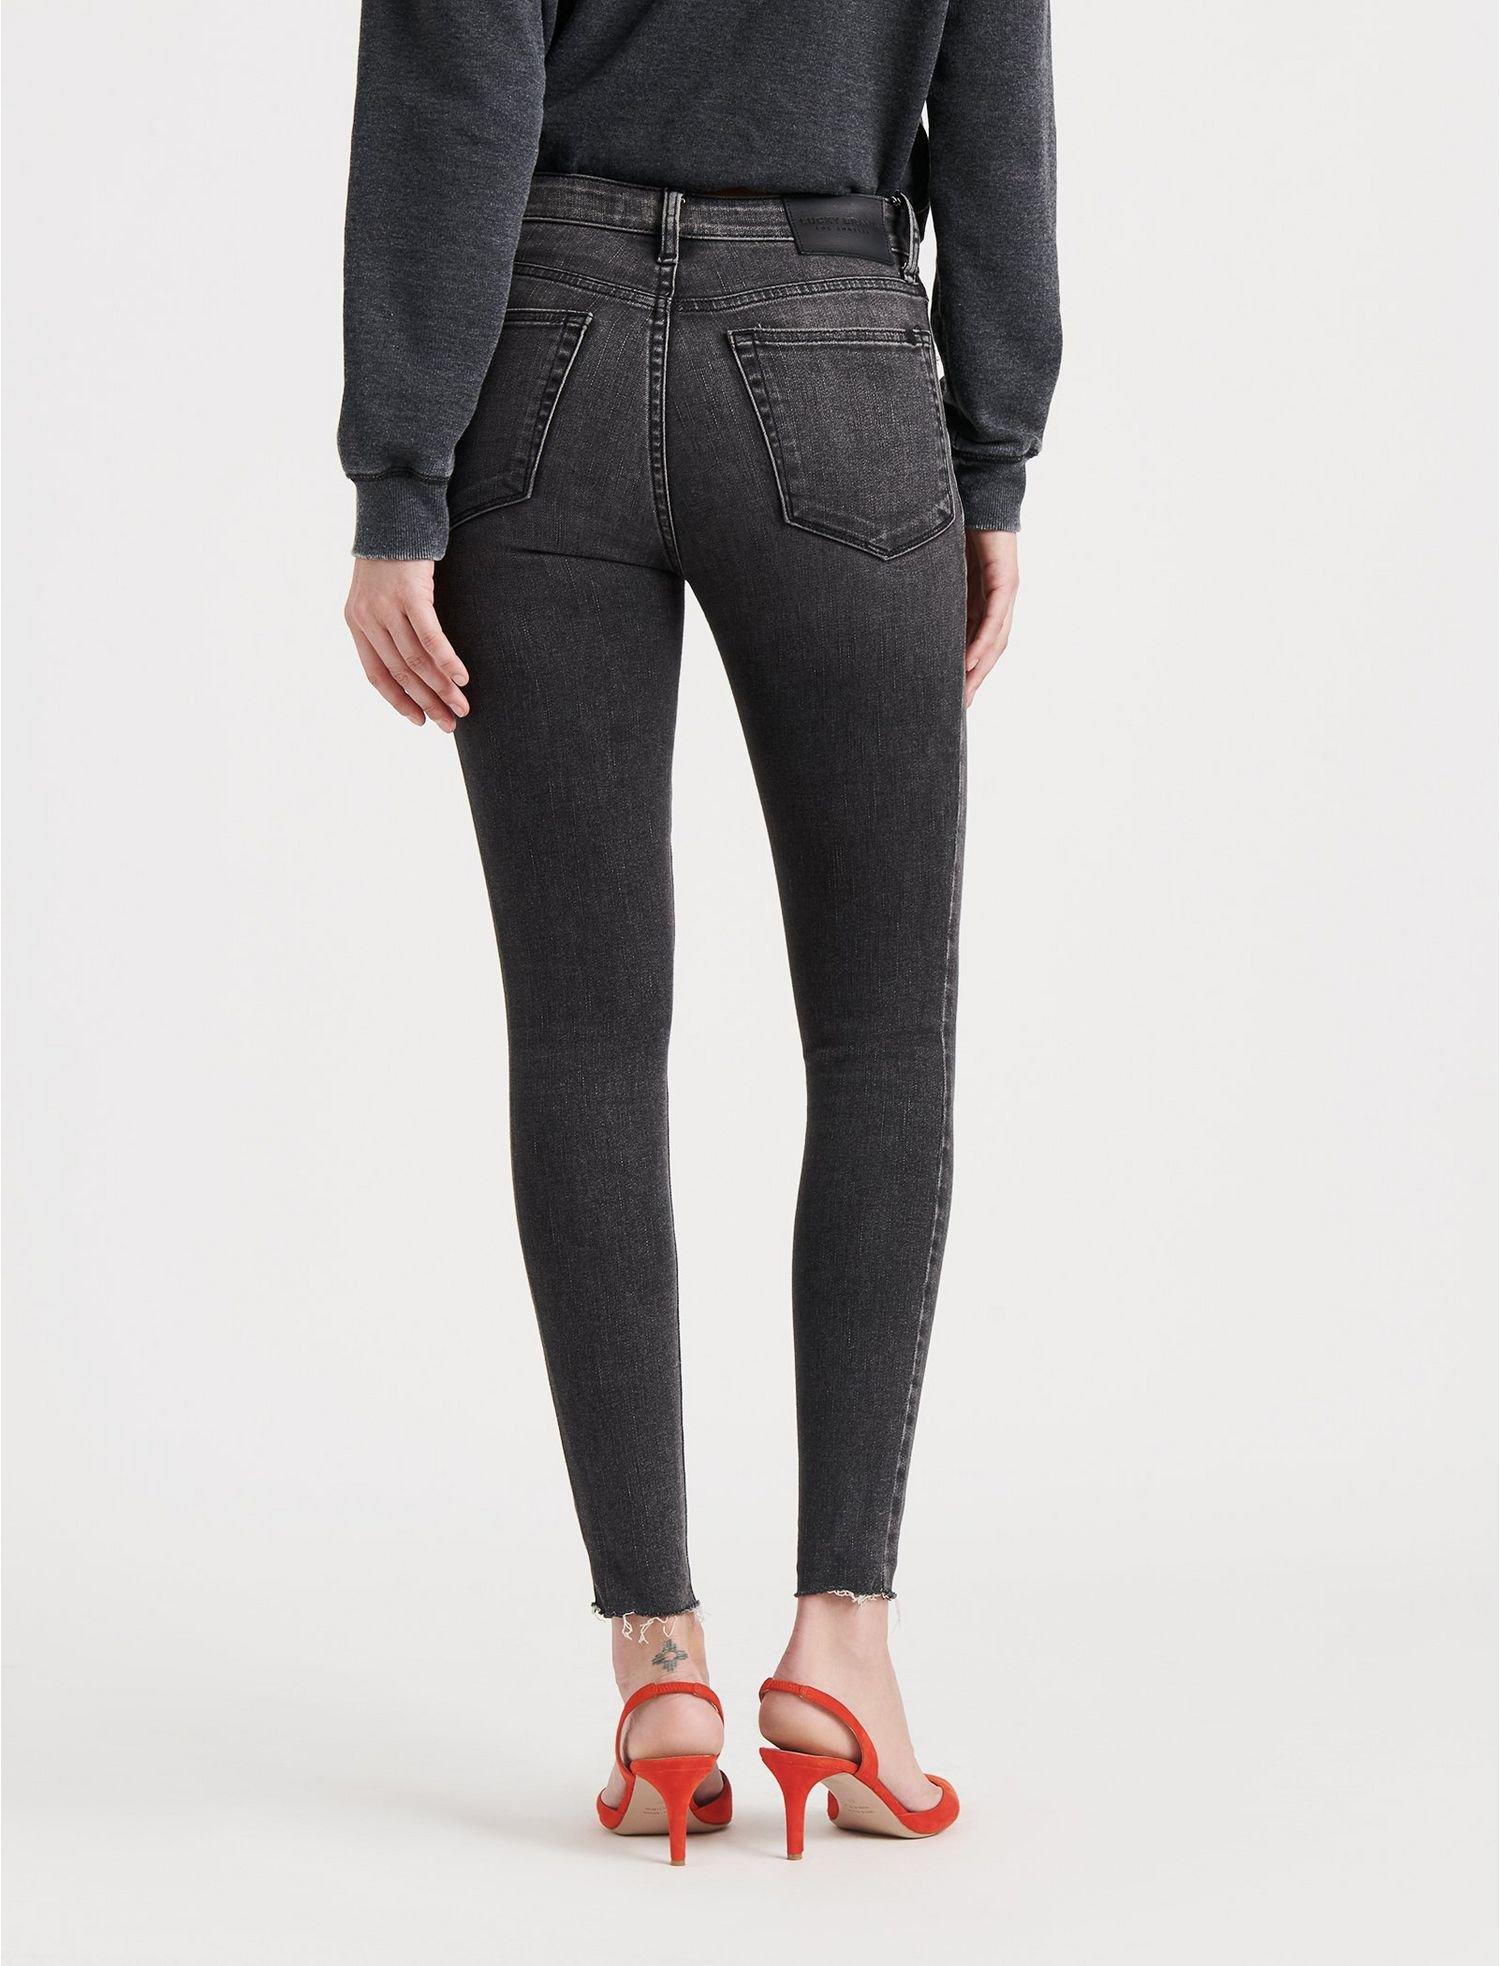 jeans grey womens